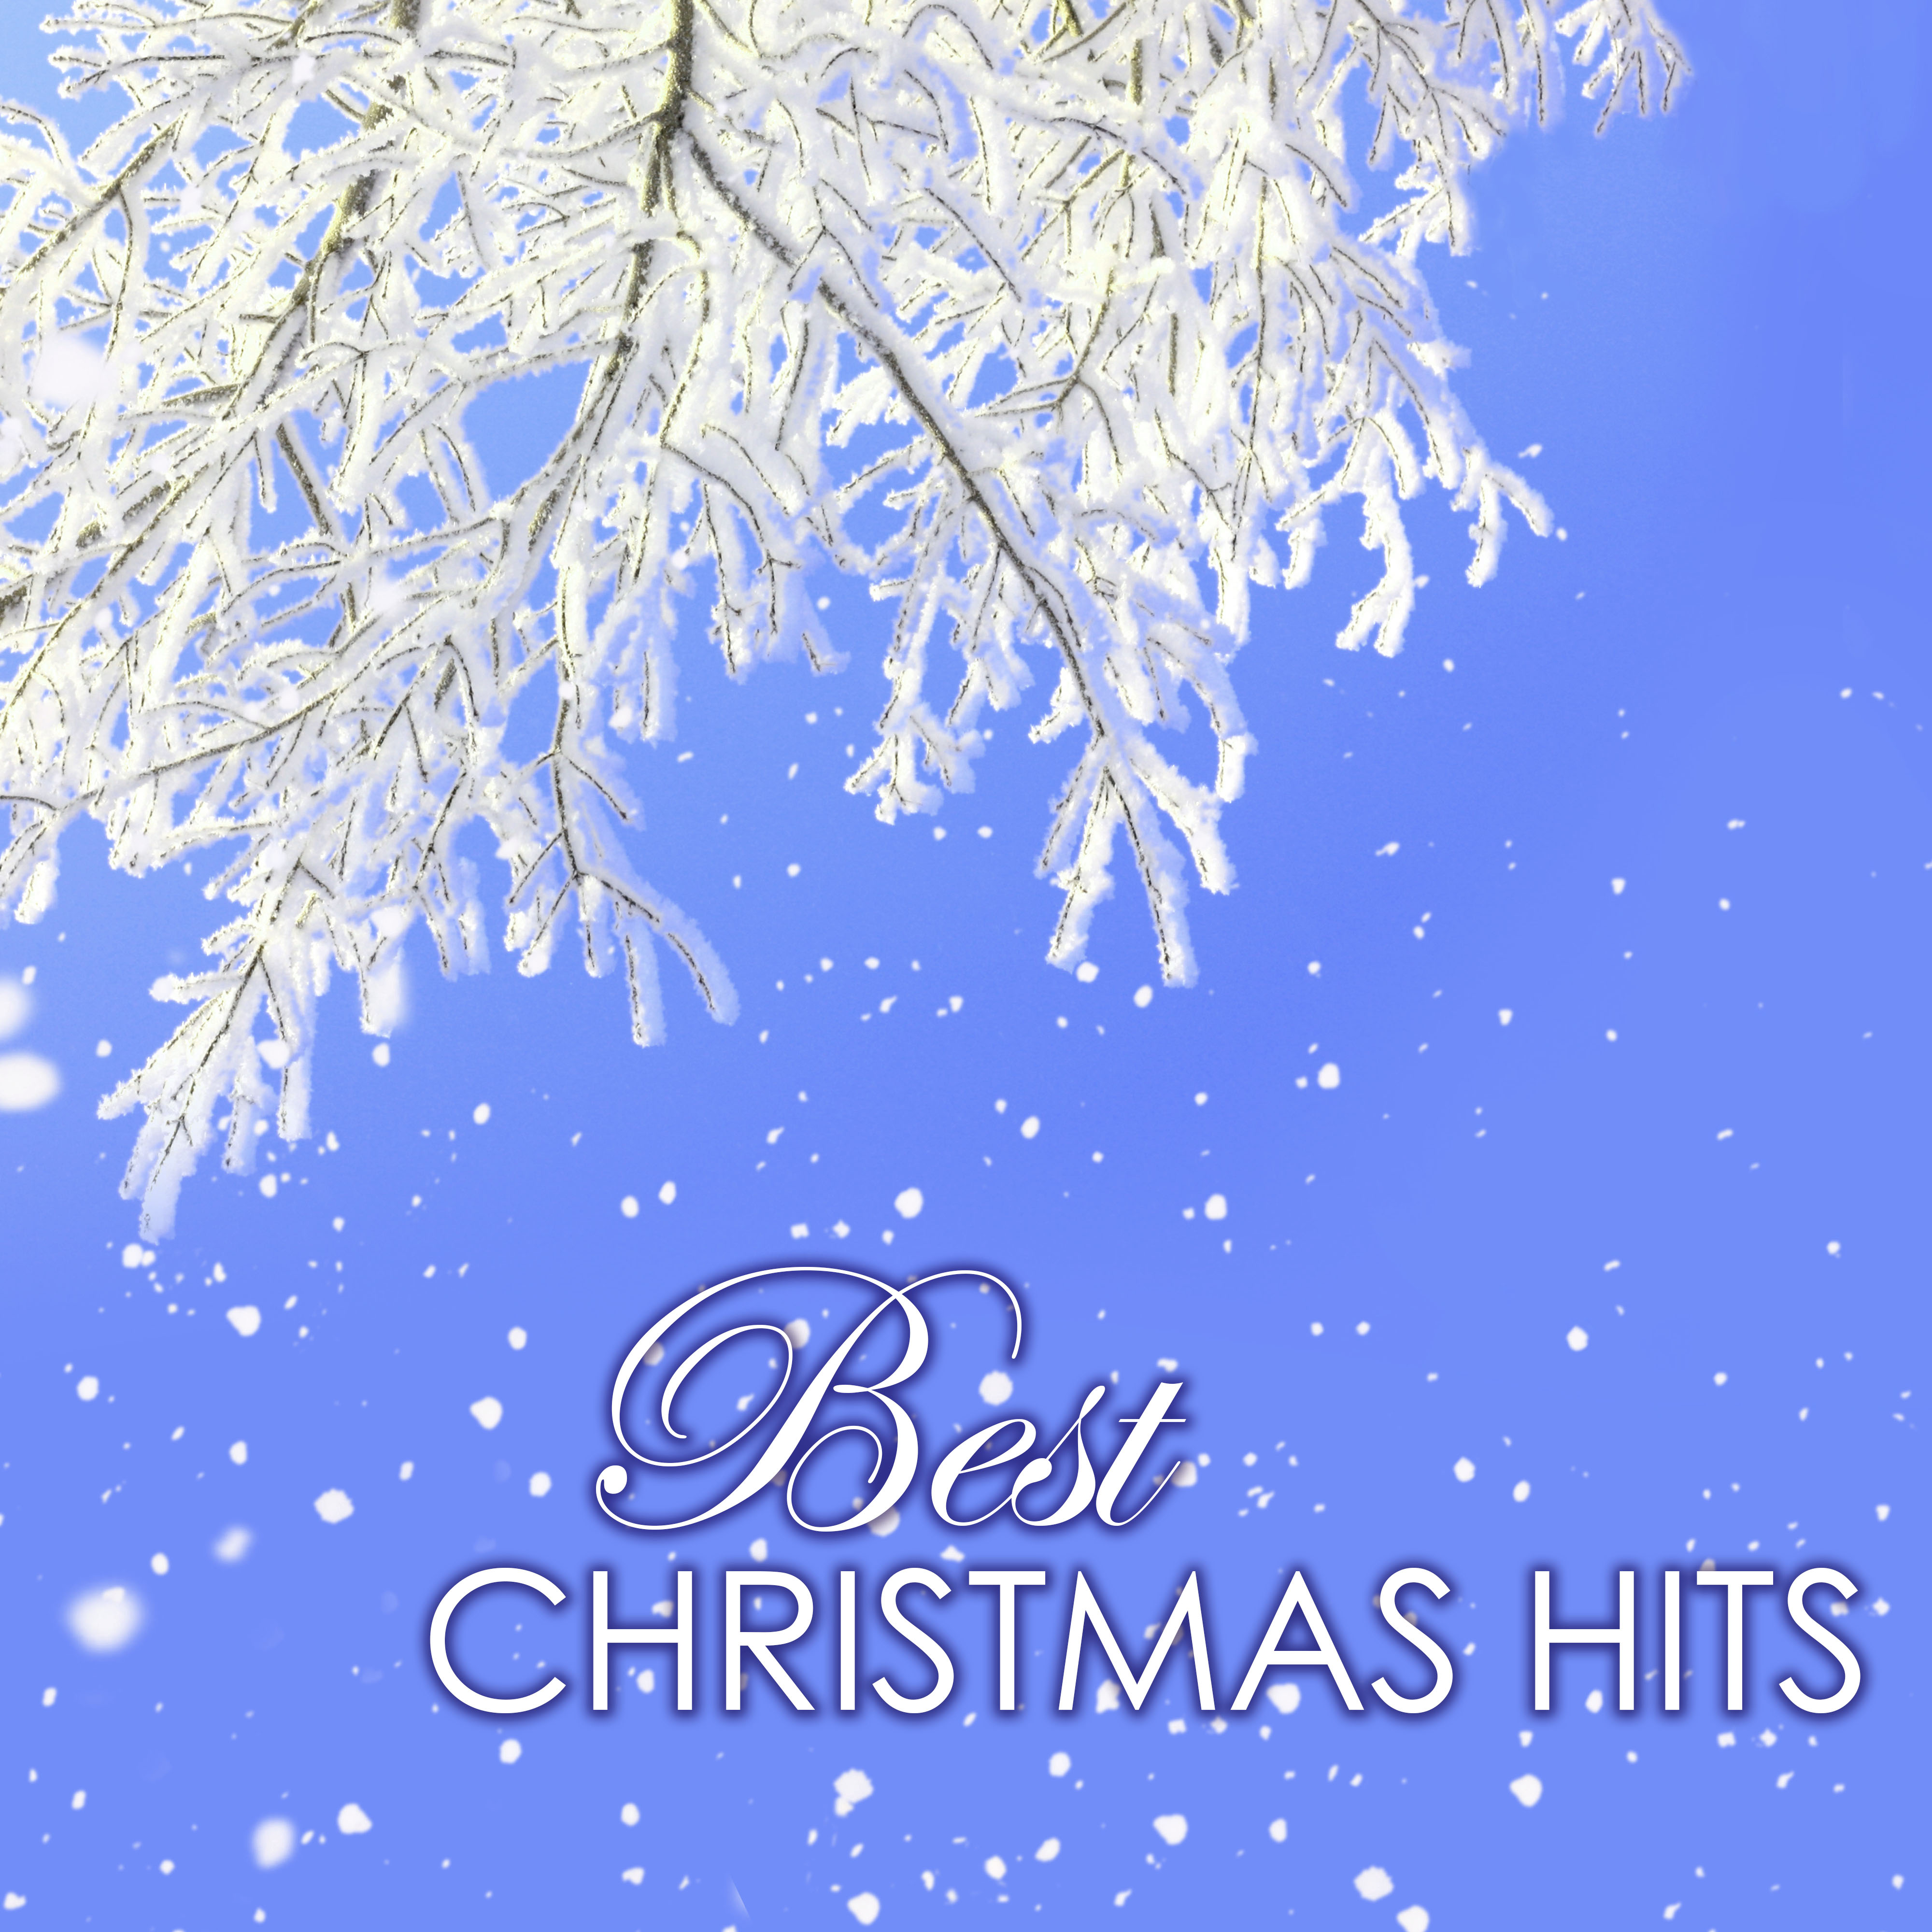 Sing We Now of Christmas - Easy Listening Christmas Music